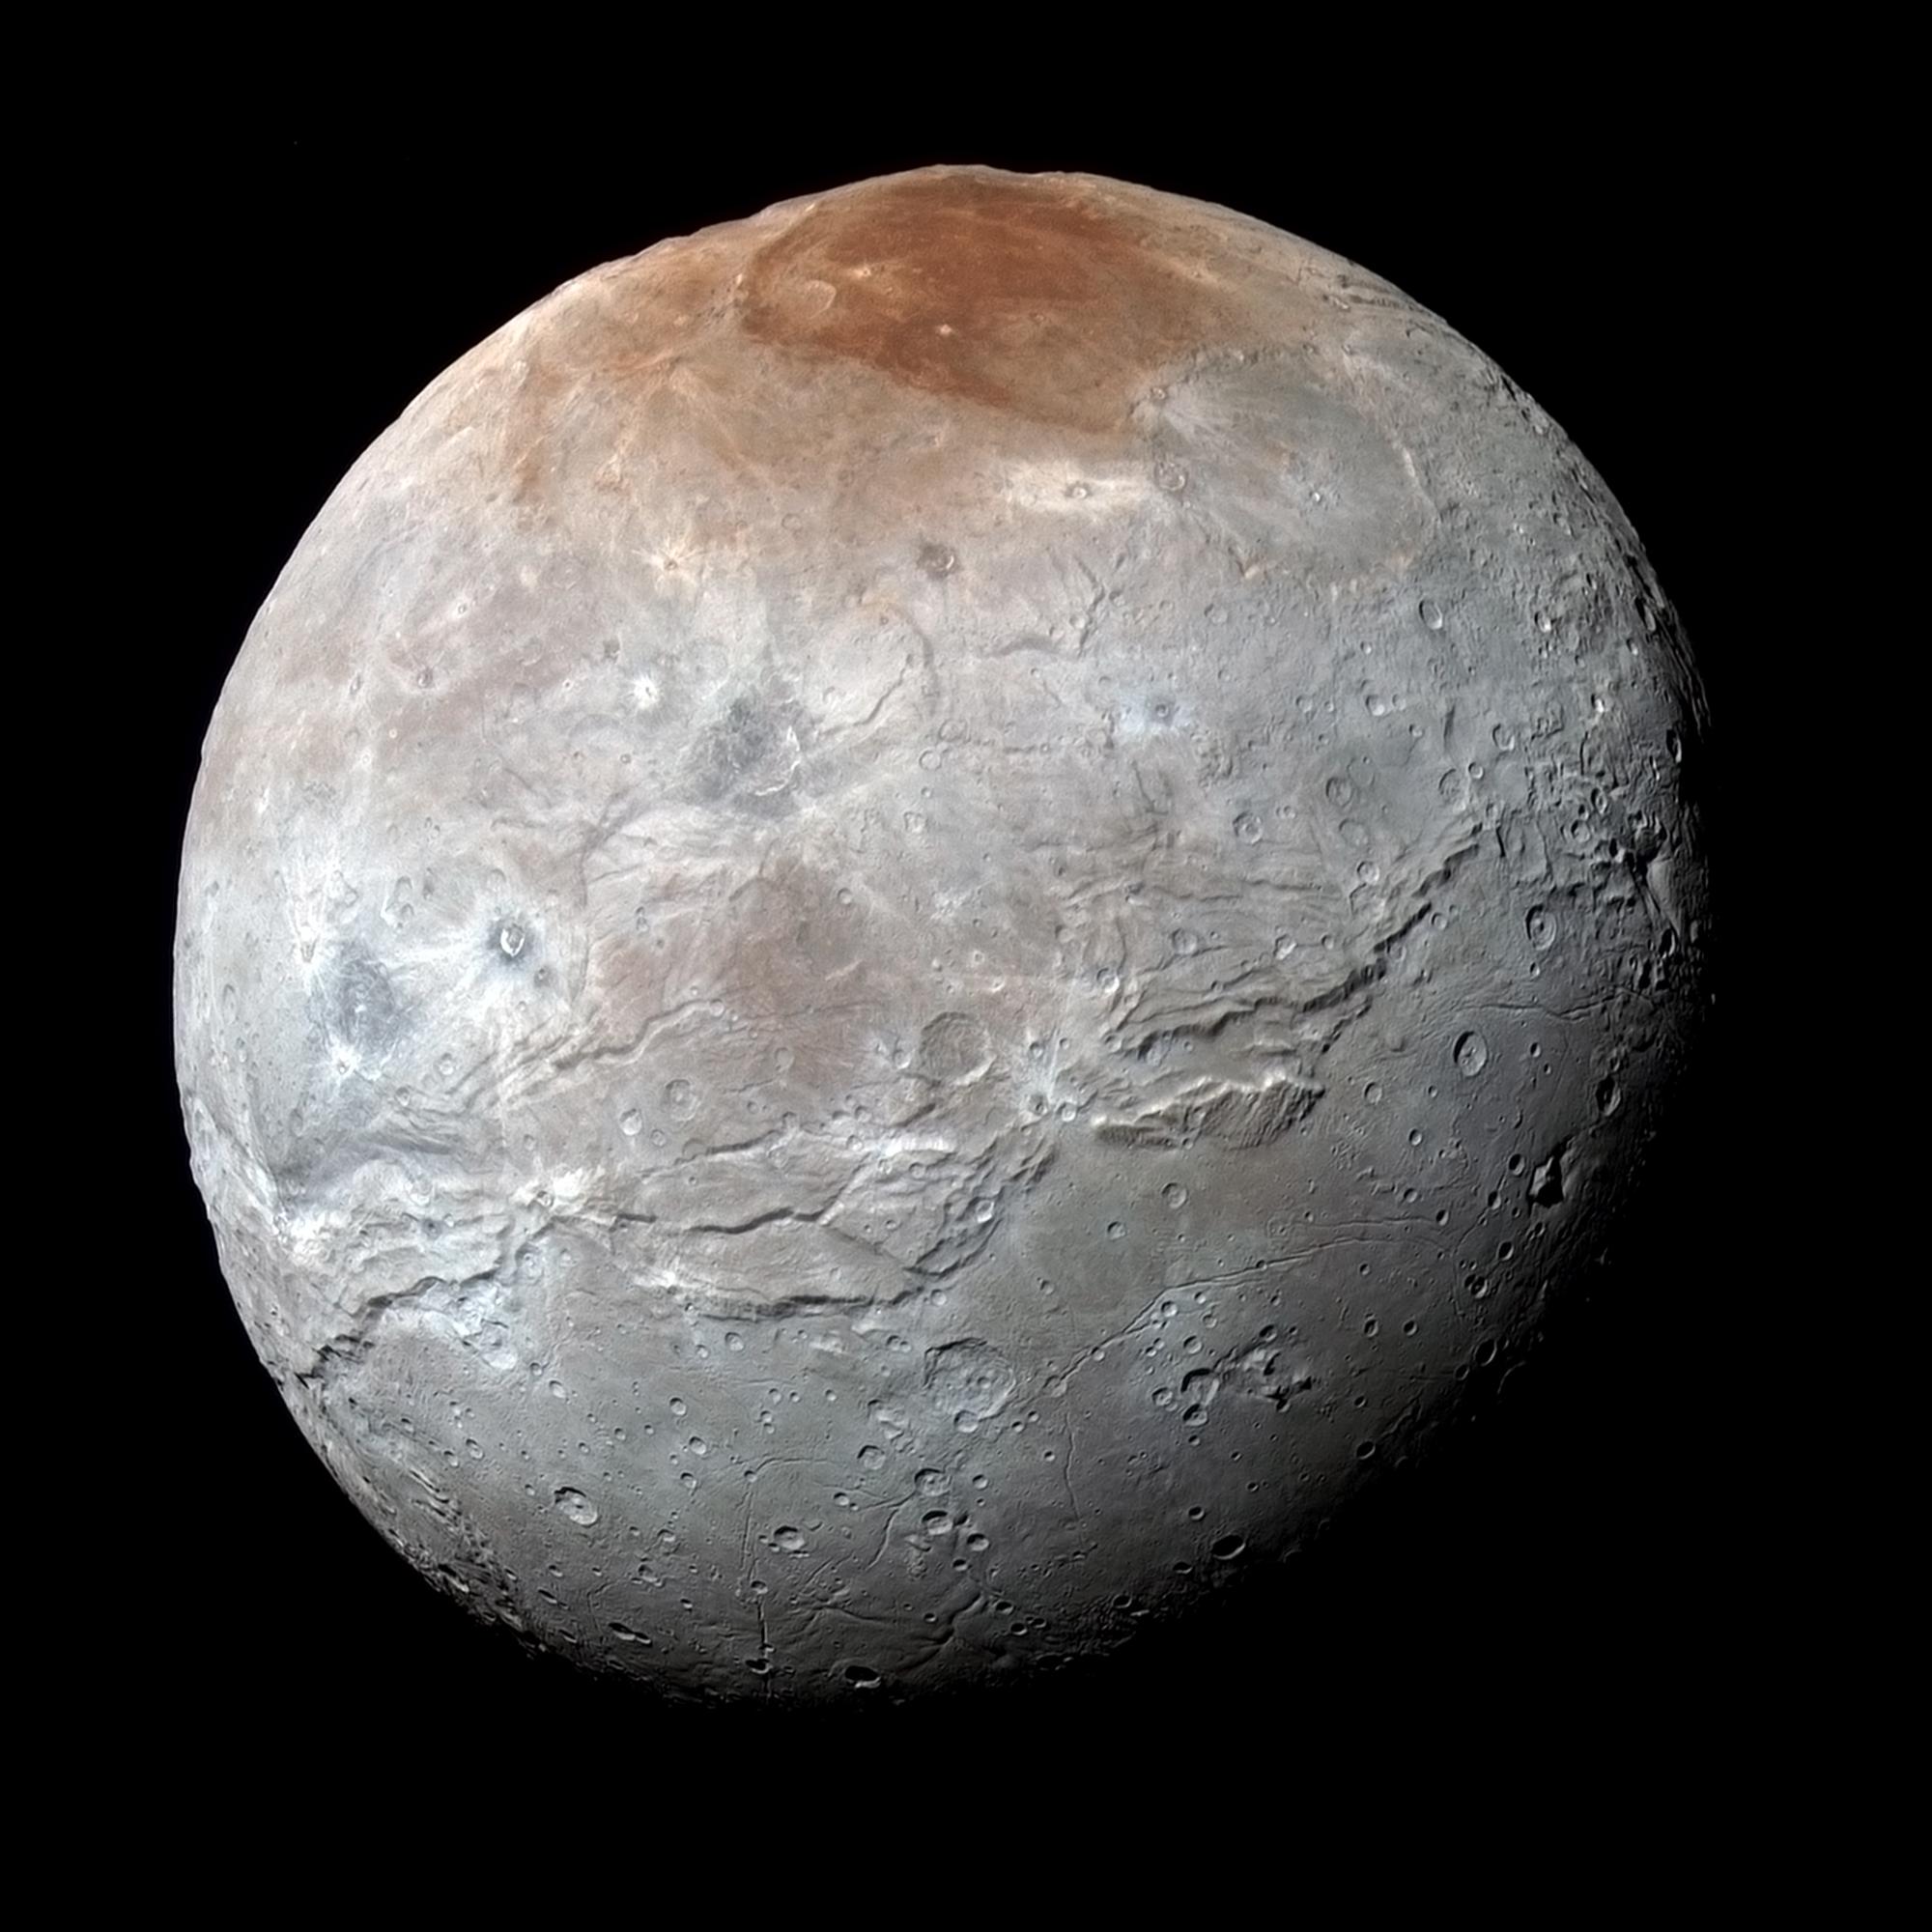 Enhanced color image showing surface details of moon Charon.